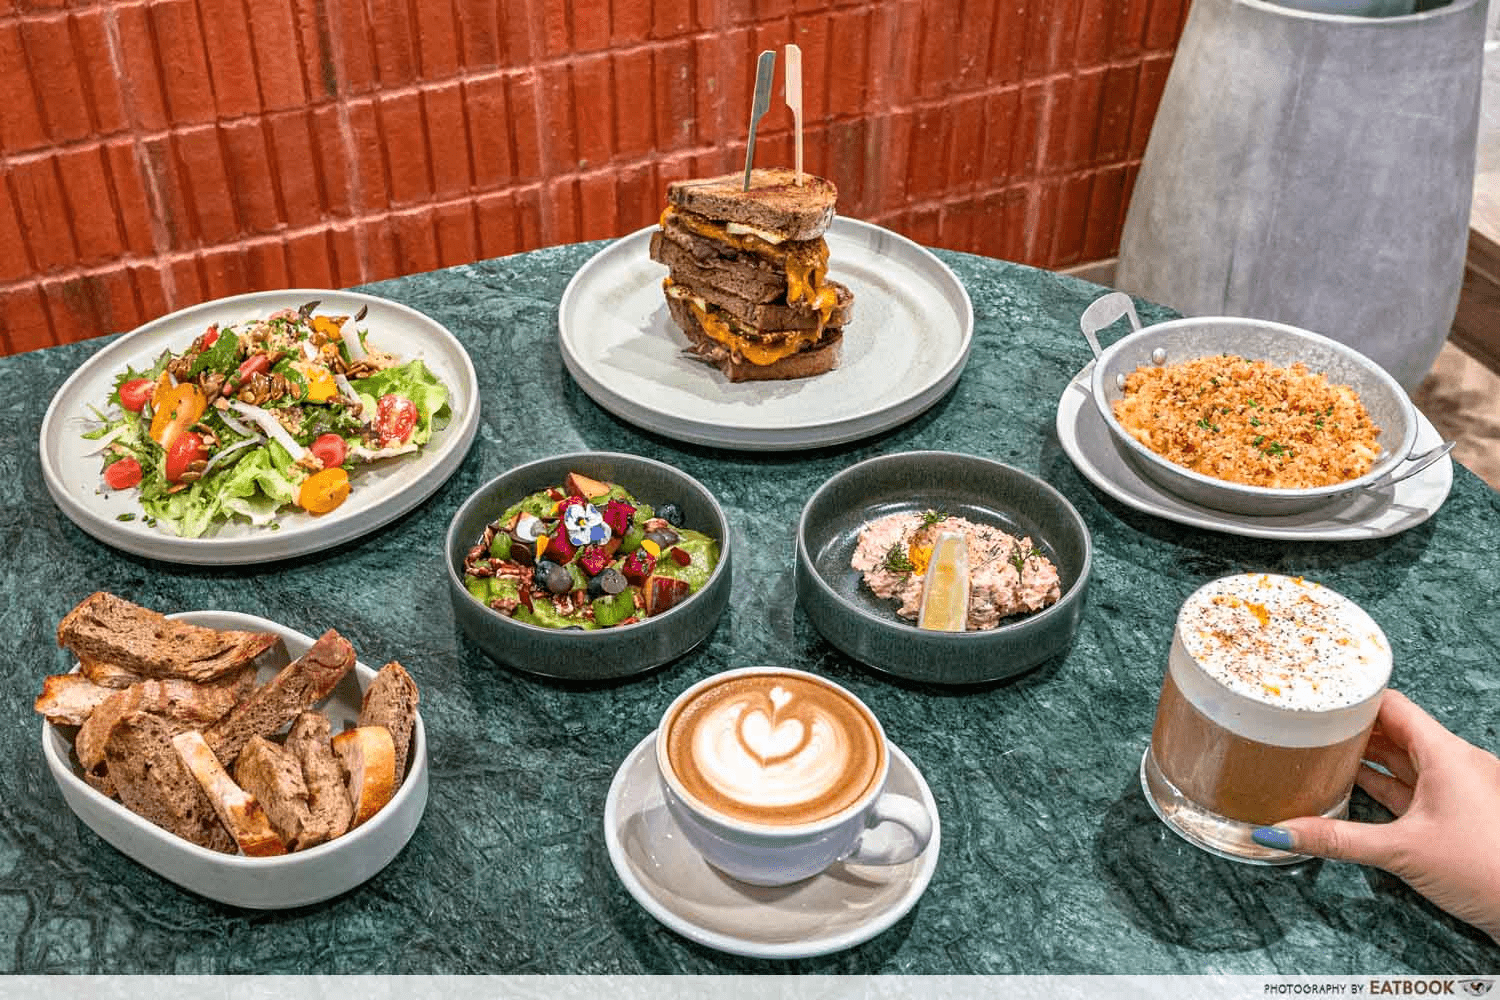 Glass house cafes - The Glasshouse food